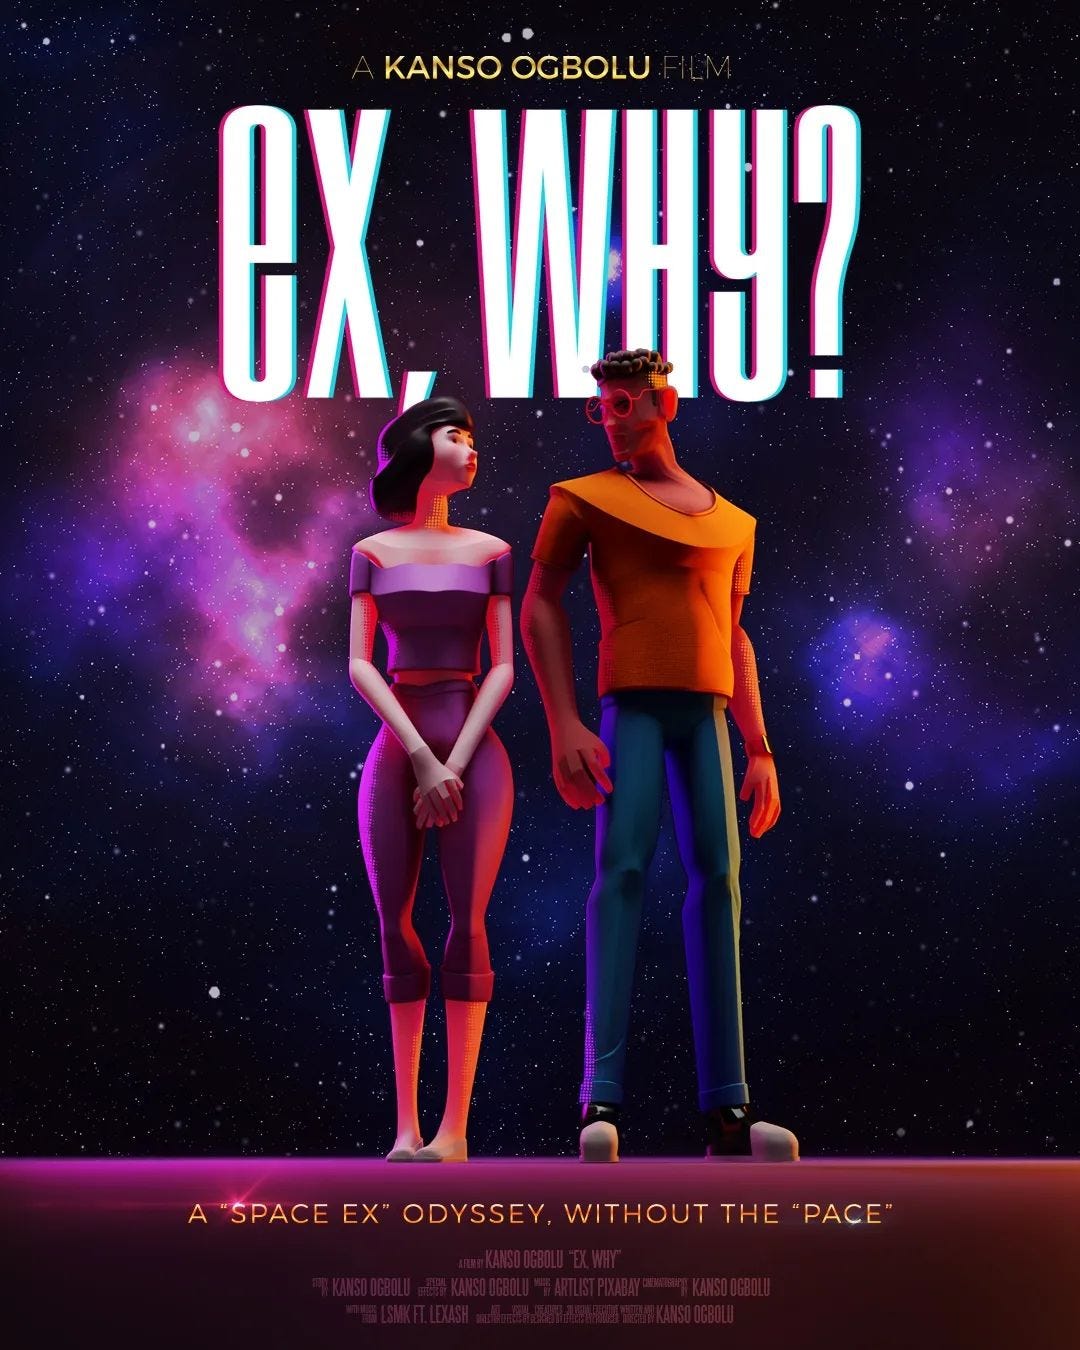 "Ex, why?" tells the story of two former lovers who, seeking closure, meet up one last time. This leads to a chain of events that may change the course of their lives forever.